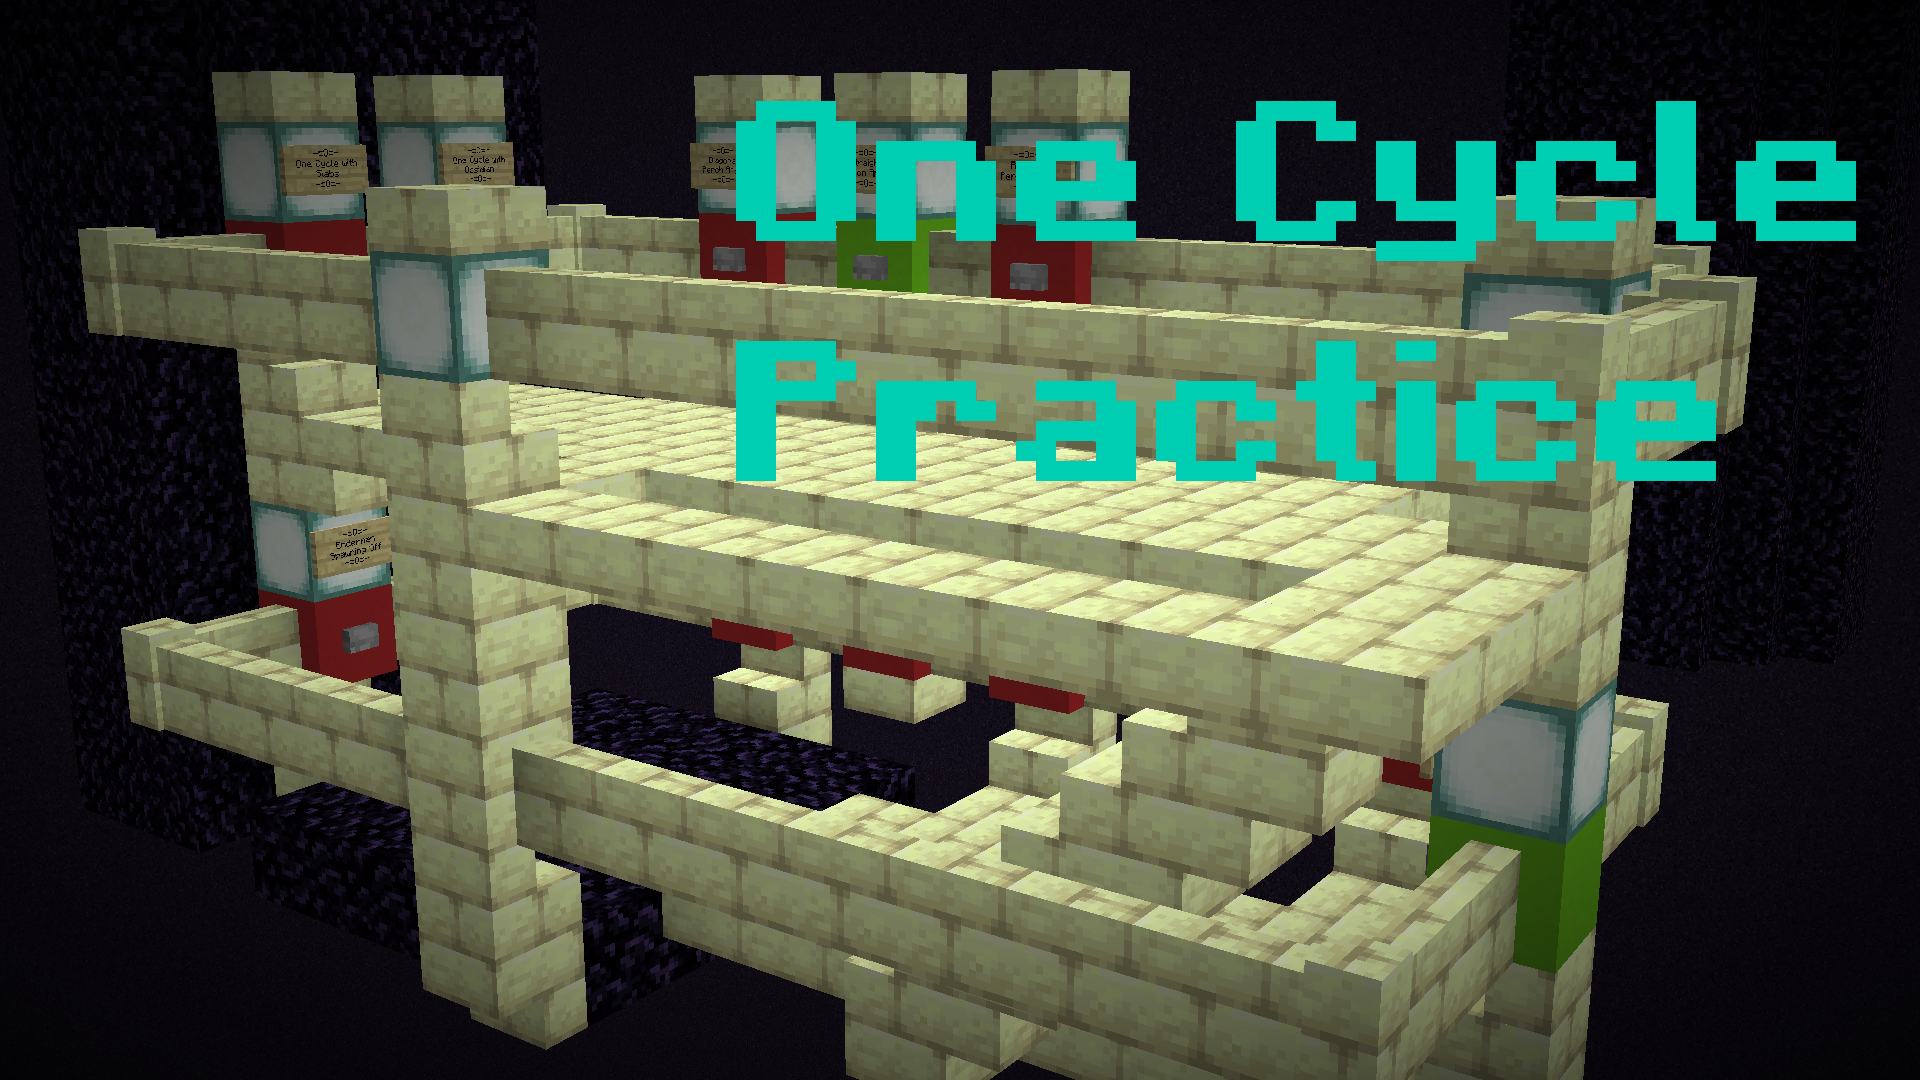 Download One Cycle Practice for Minecraft 1.16.1